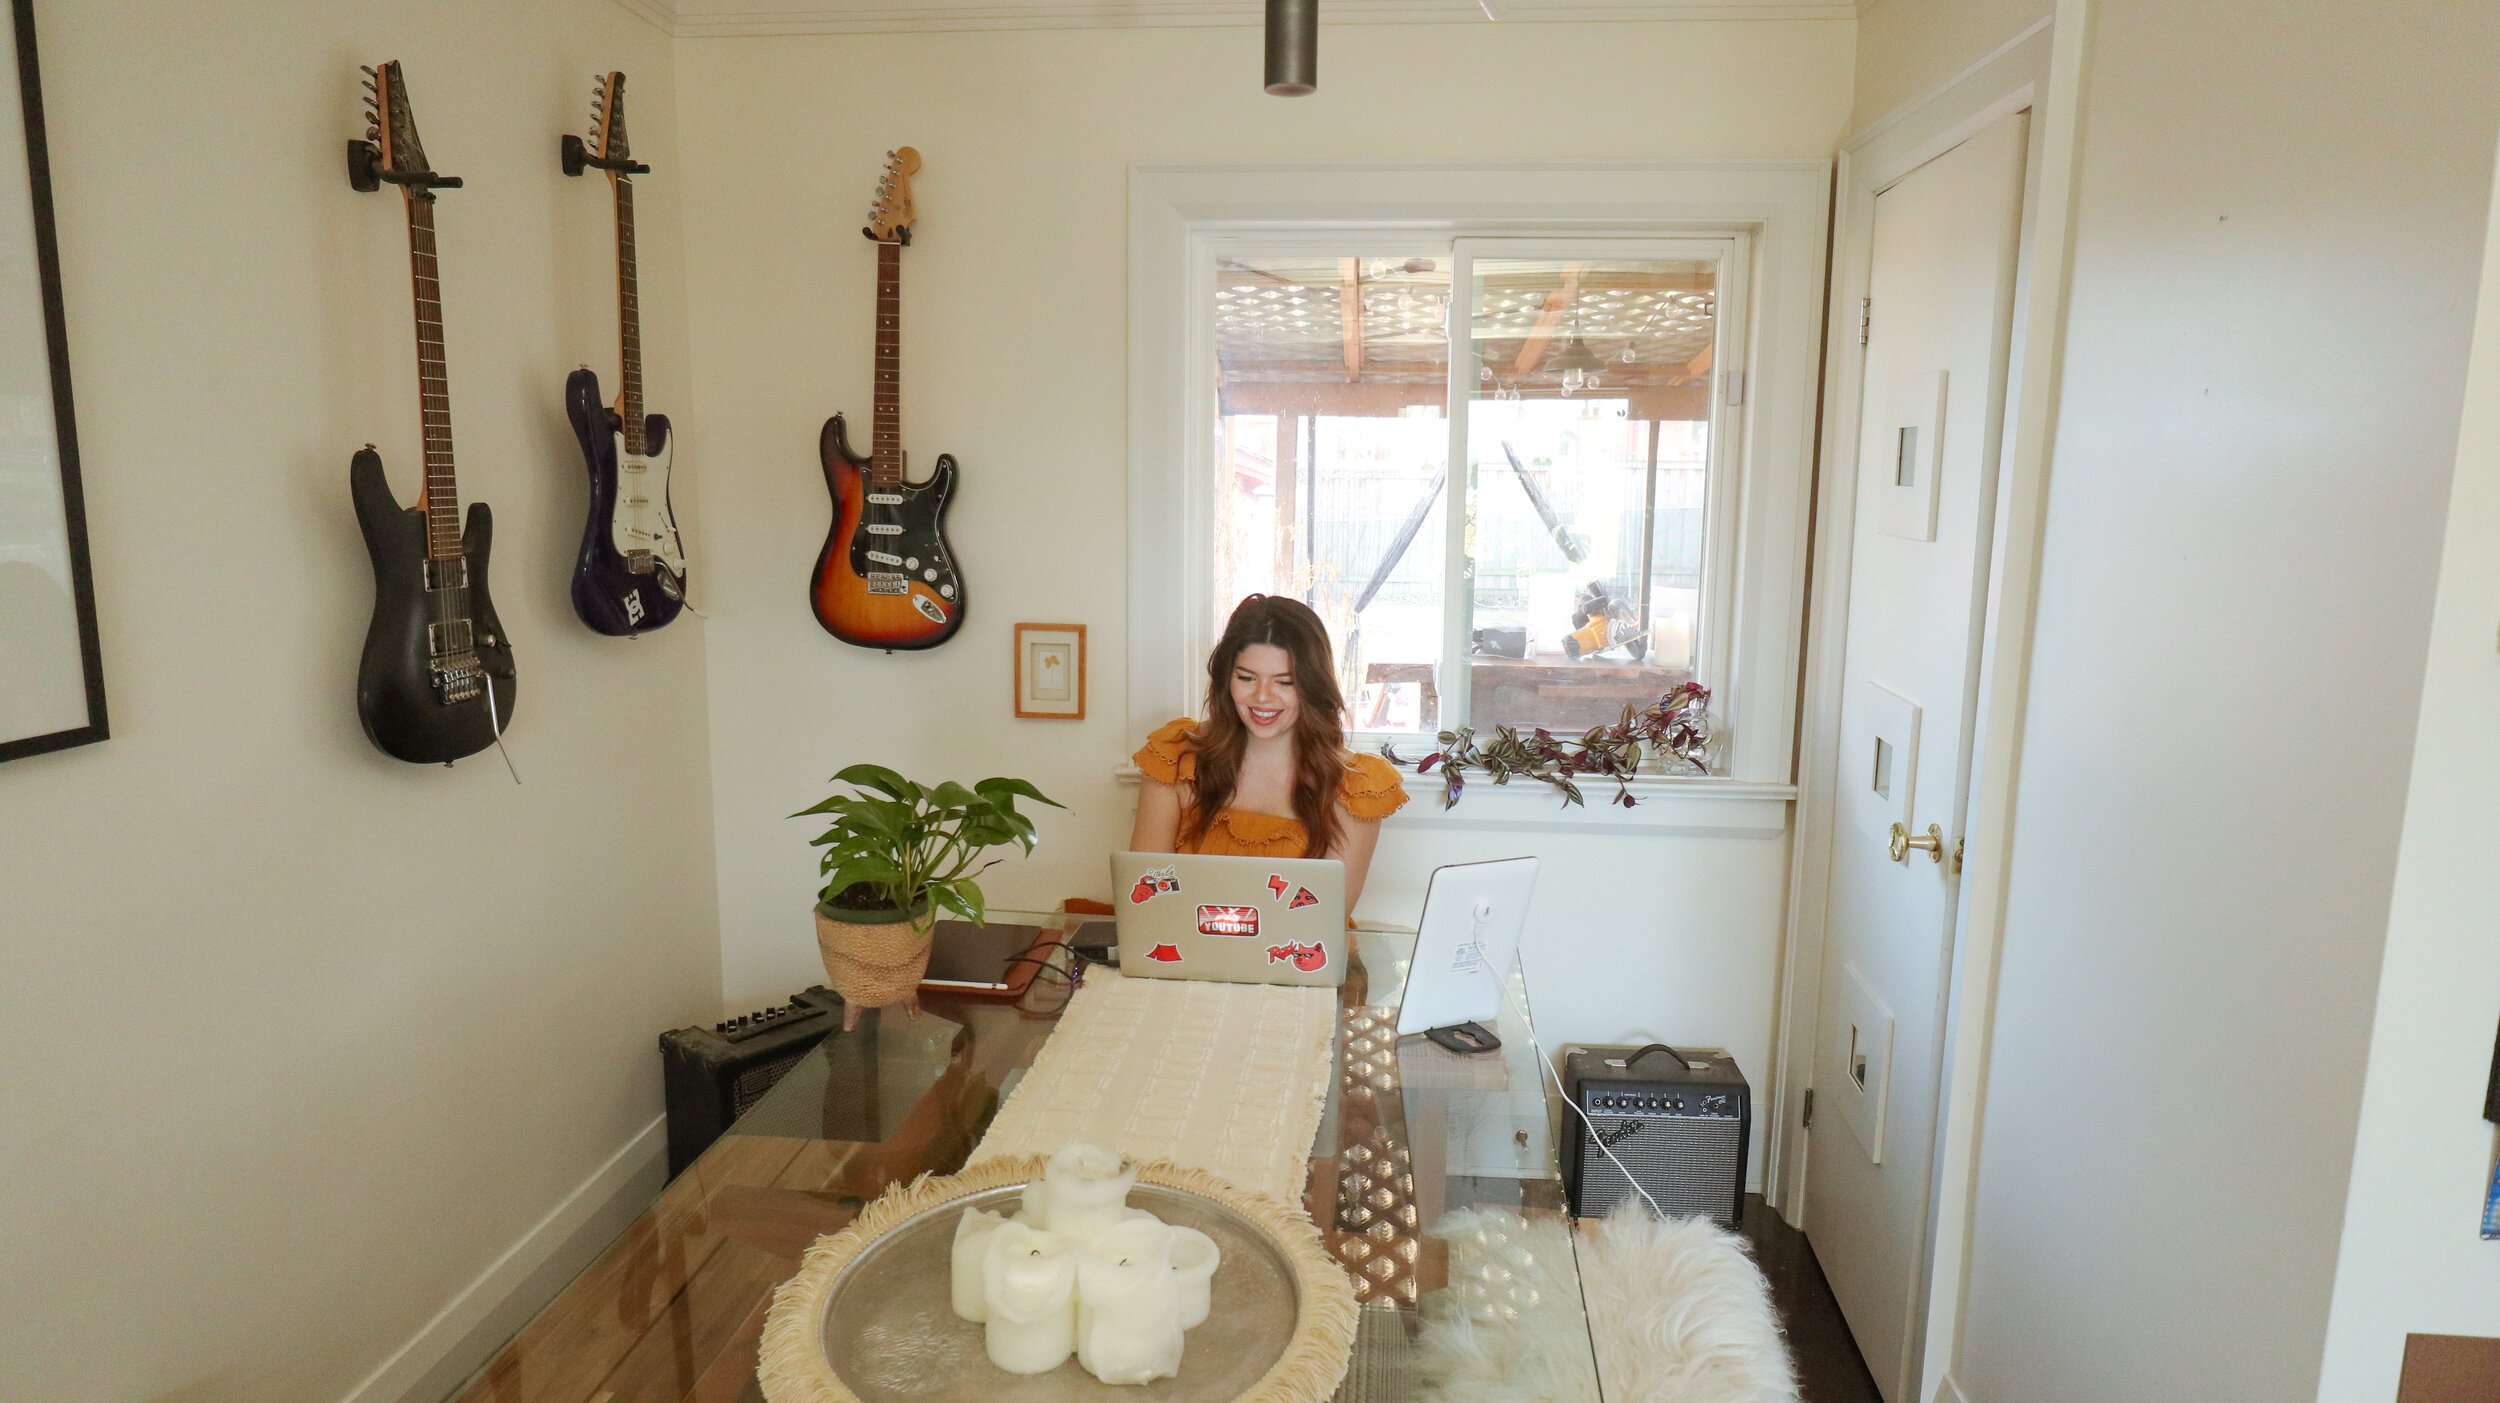 Hunch no more: How to set up the ultimate home office in quarantine